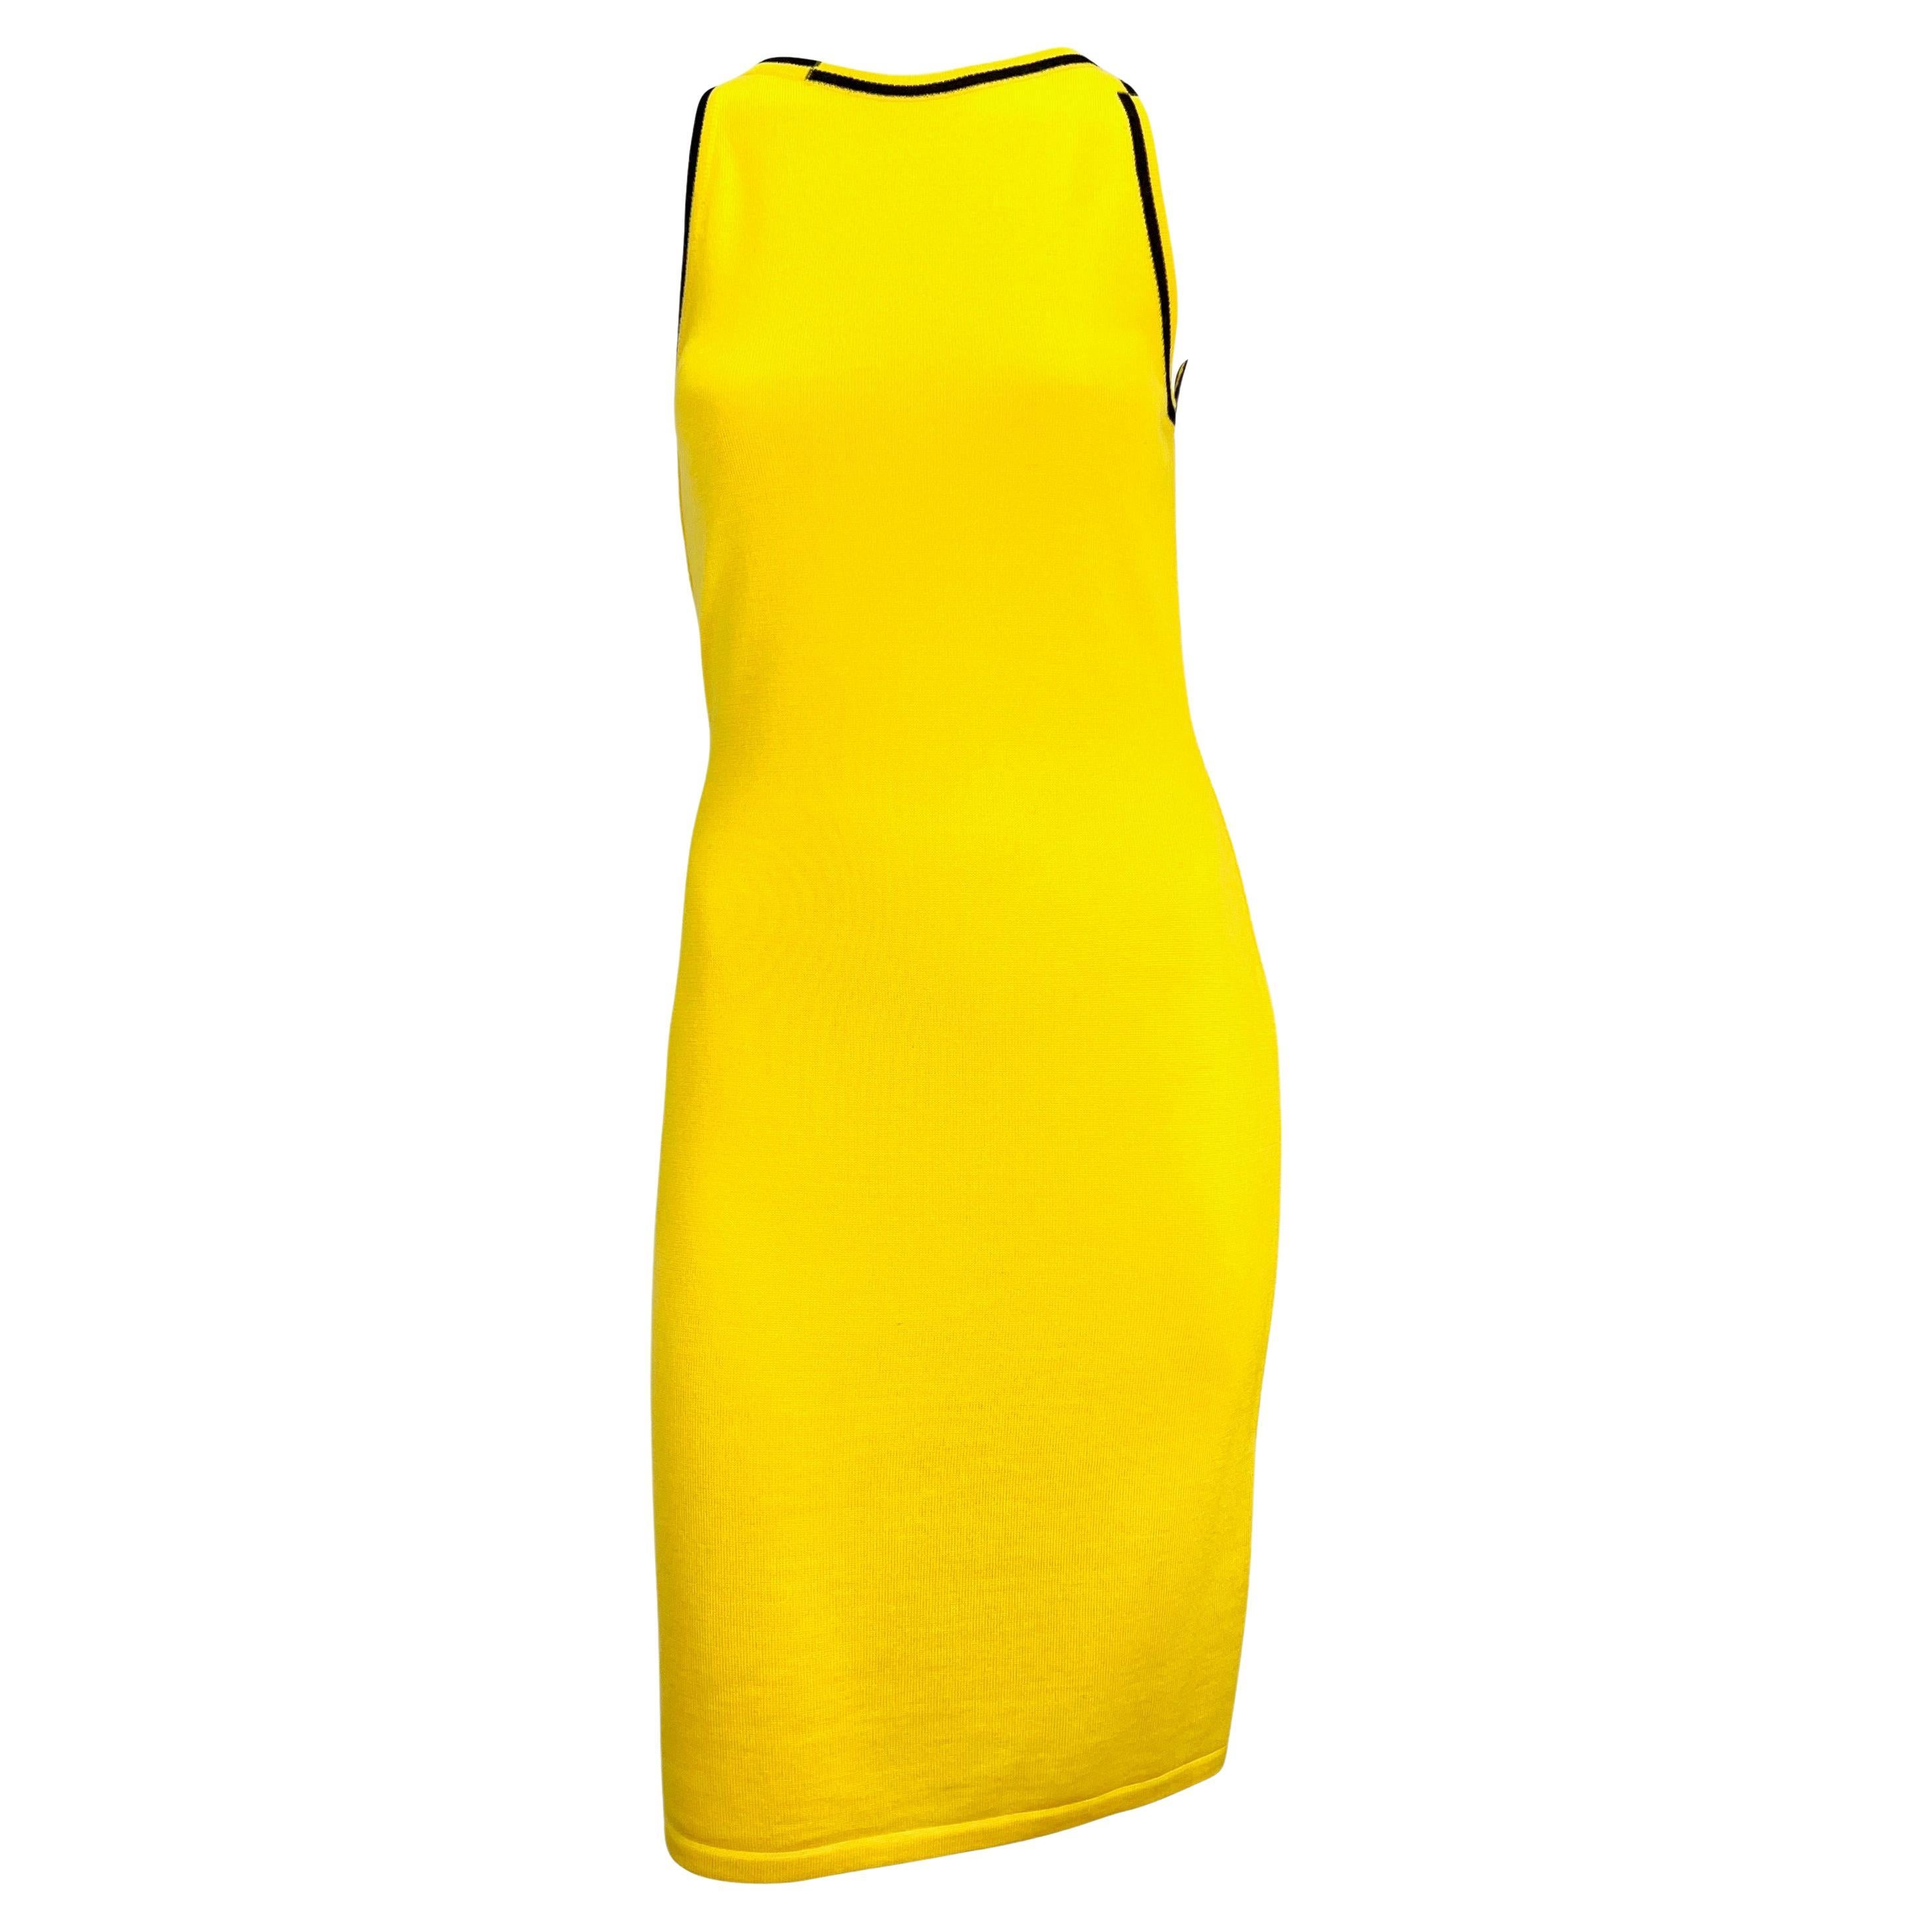 Late 1990s Gianni Versace Canary Yellow Knit Wool Sleeveless Dress For Sale 1